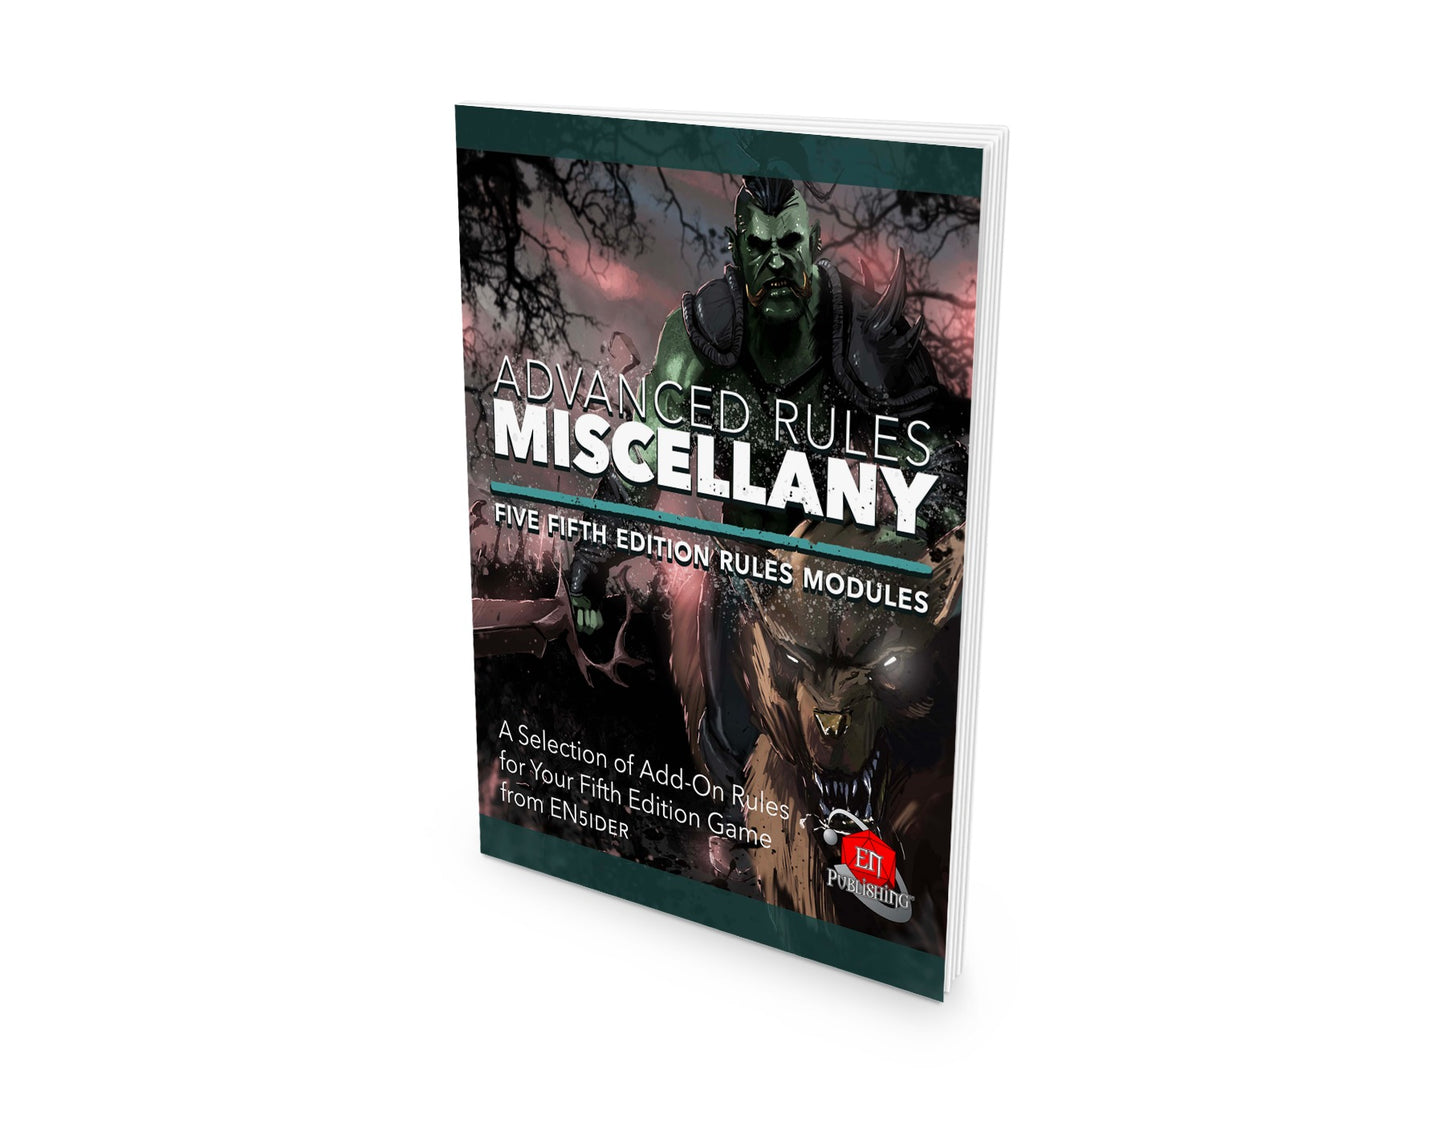 Advanced Rules Miscellany: Five 5th Edition Rules Modules